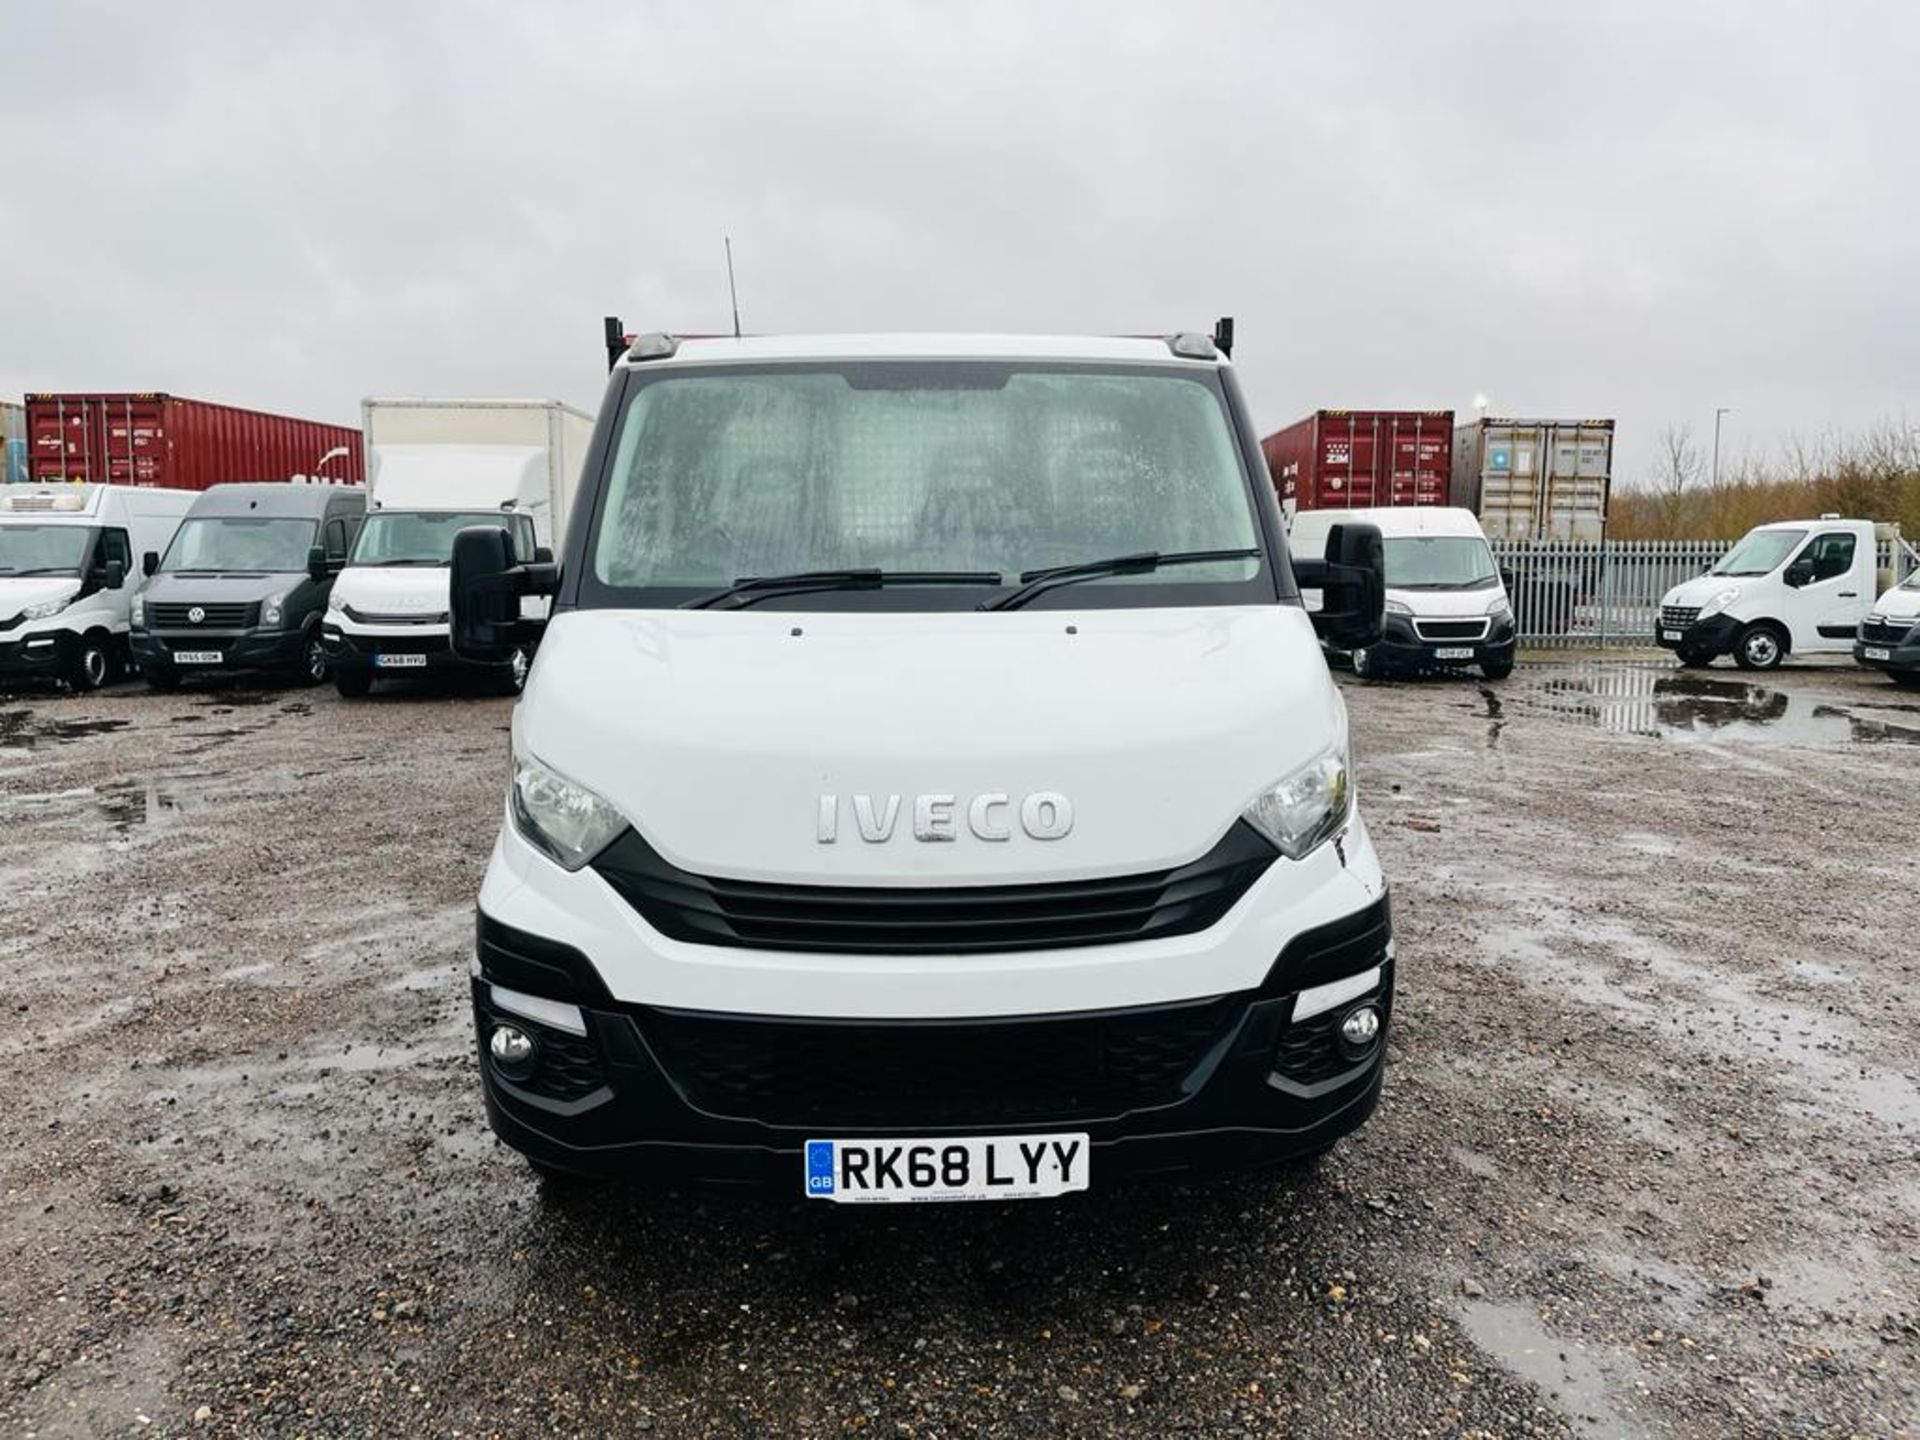 ** ON SALE **Iveco Daily 35C14 2.3 HPI 2018 '68 Reg' Alloy Dropside - ULEZ Compliant - Image 2 of 20